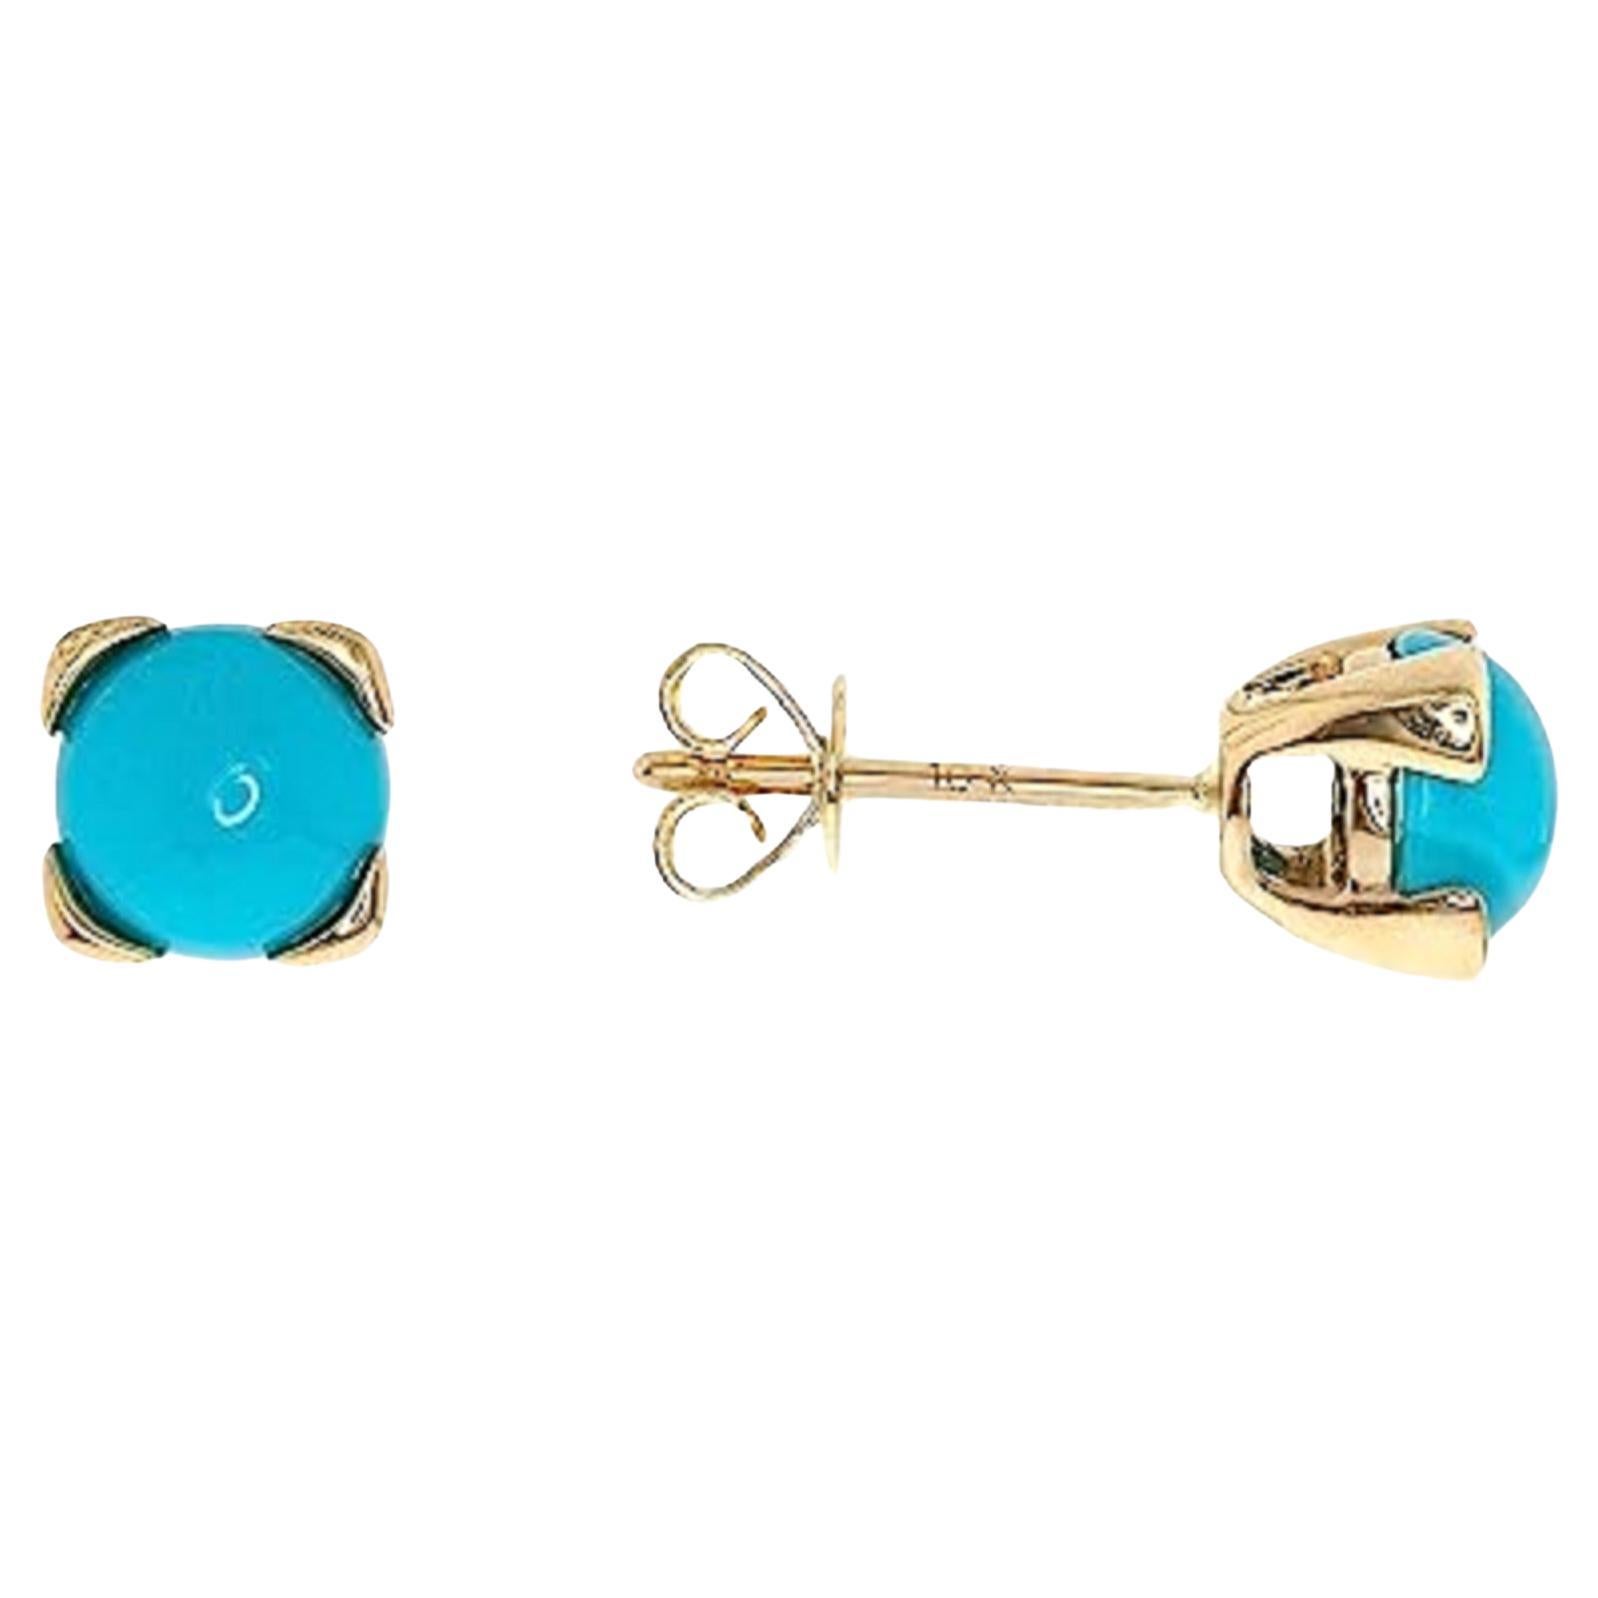 Gin & Grace 10K Yellow Gold Natural Sleeping Beuty Turquoise Earring for Women. For Sale